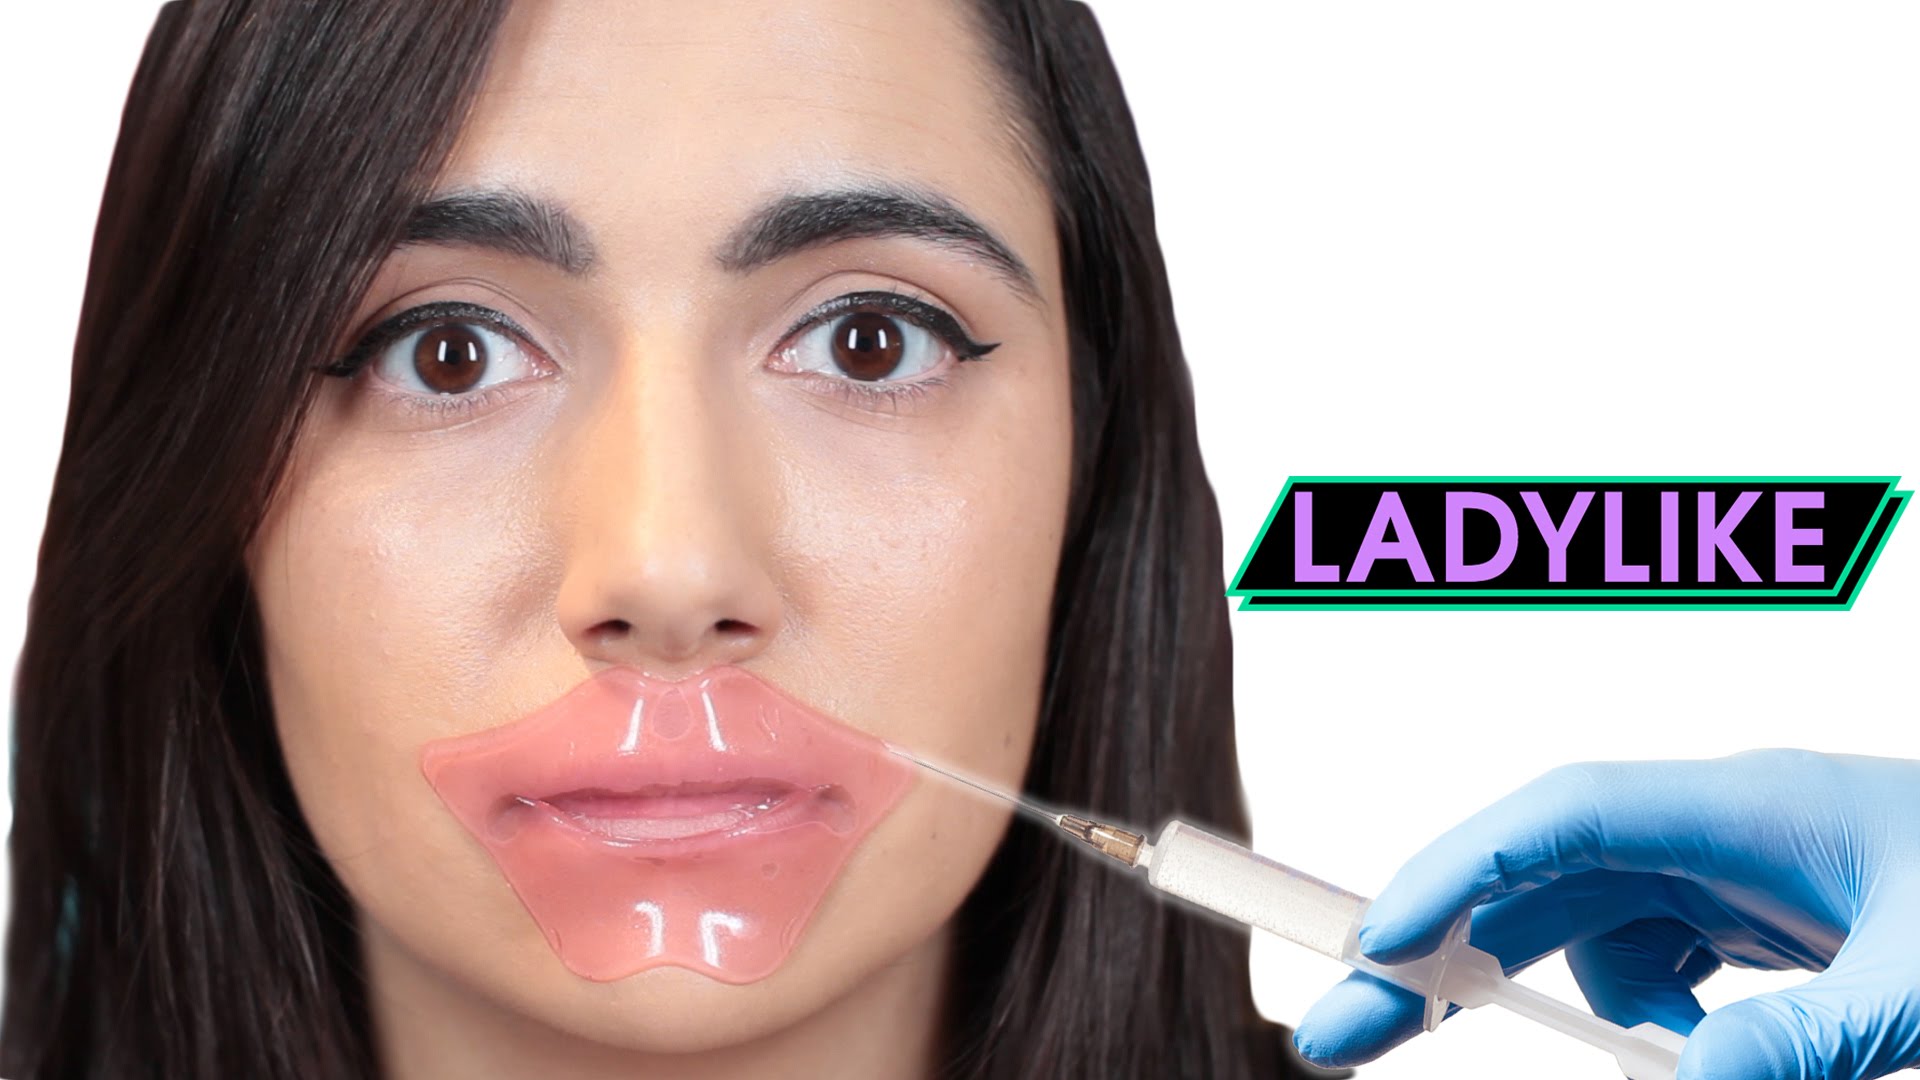 Women Try Lip Plumping Products • Ladylike